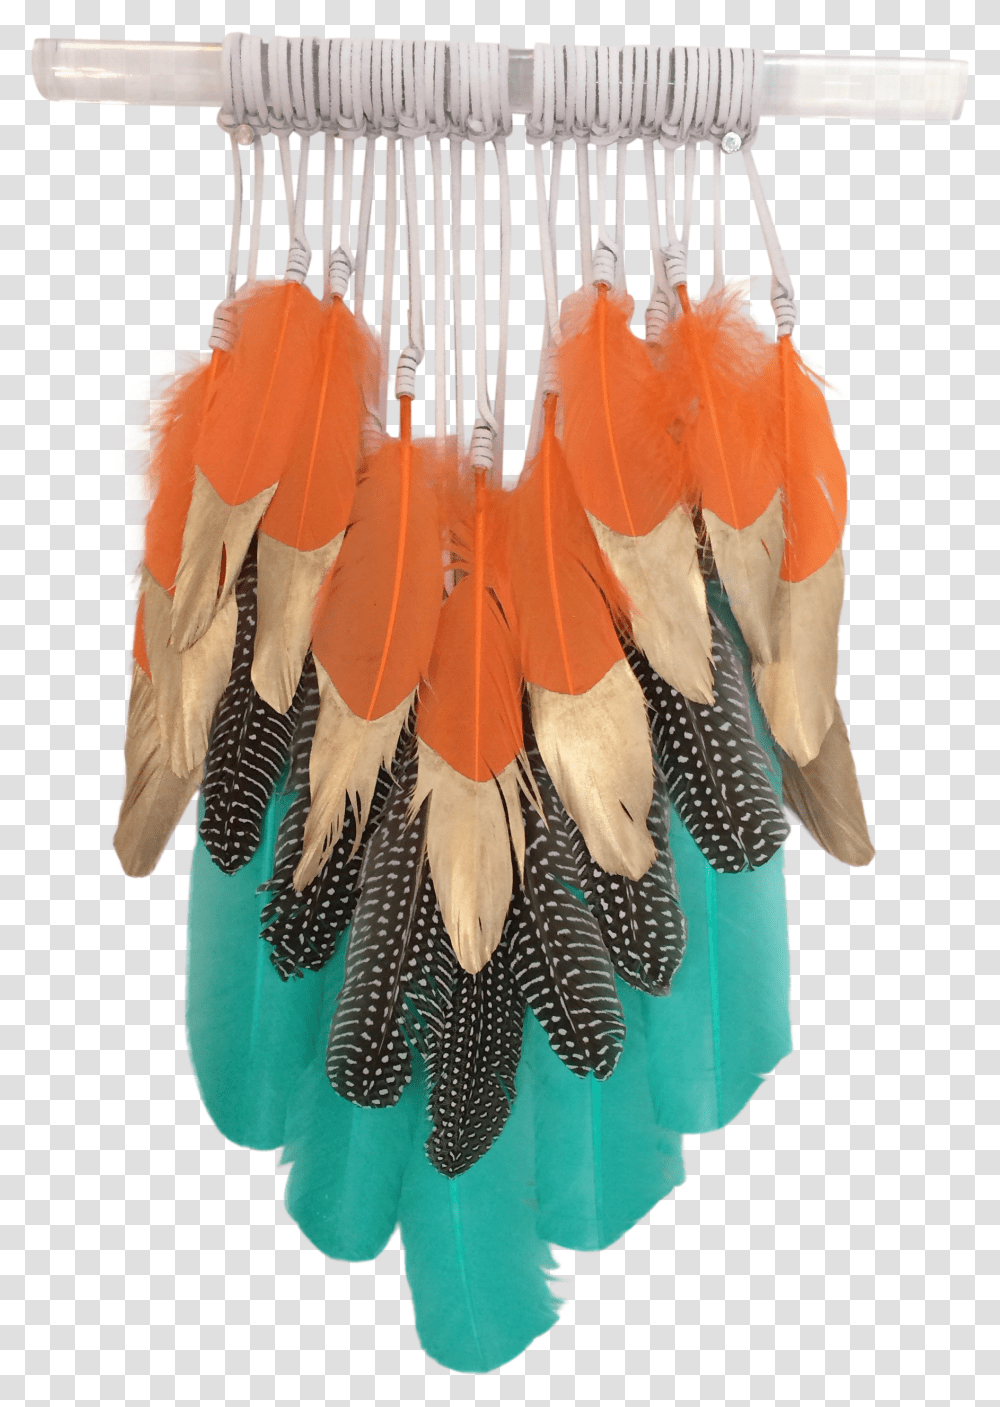 Gold Dipped Orange Amp Aqua With Speckled Feathers Earrings Transparent Png